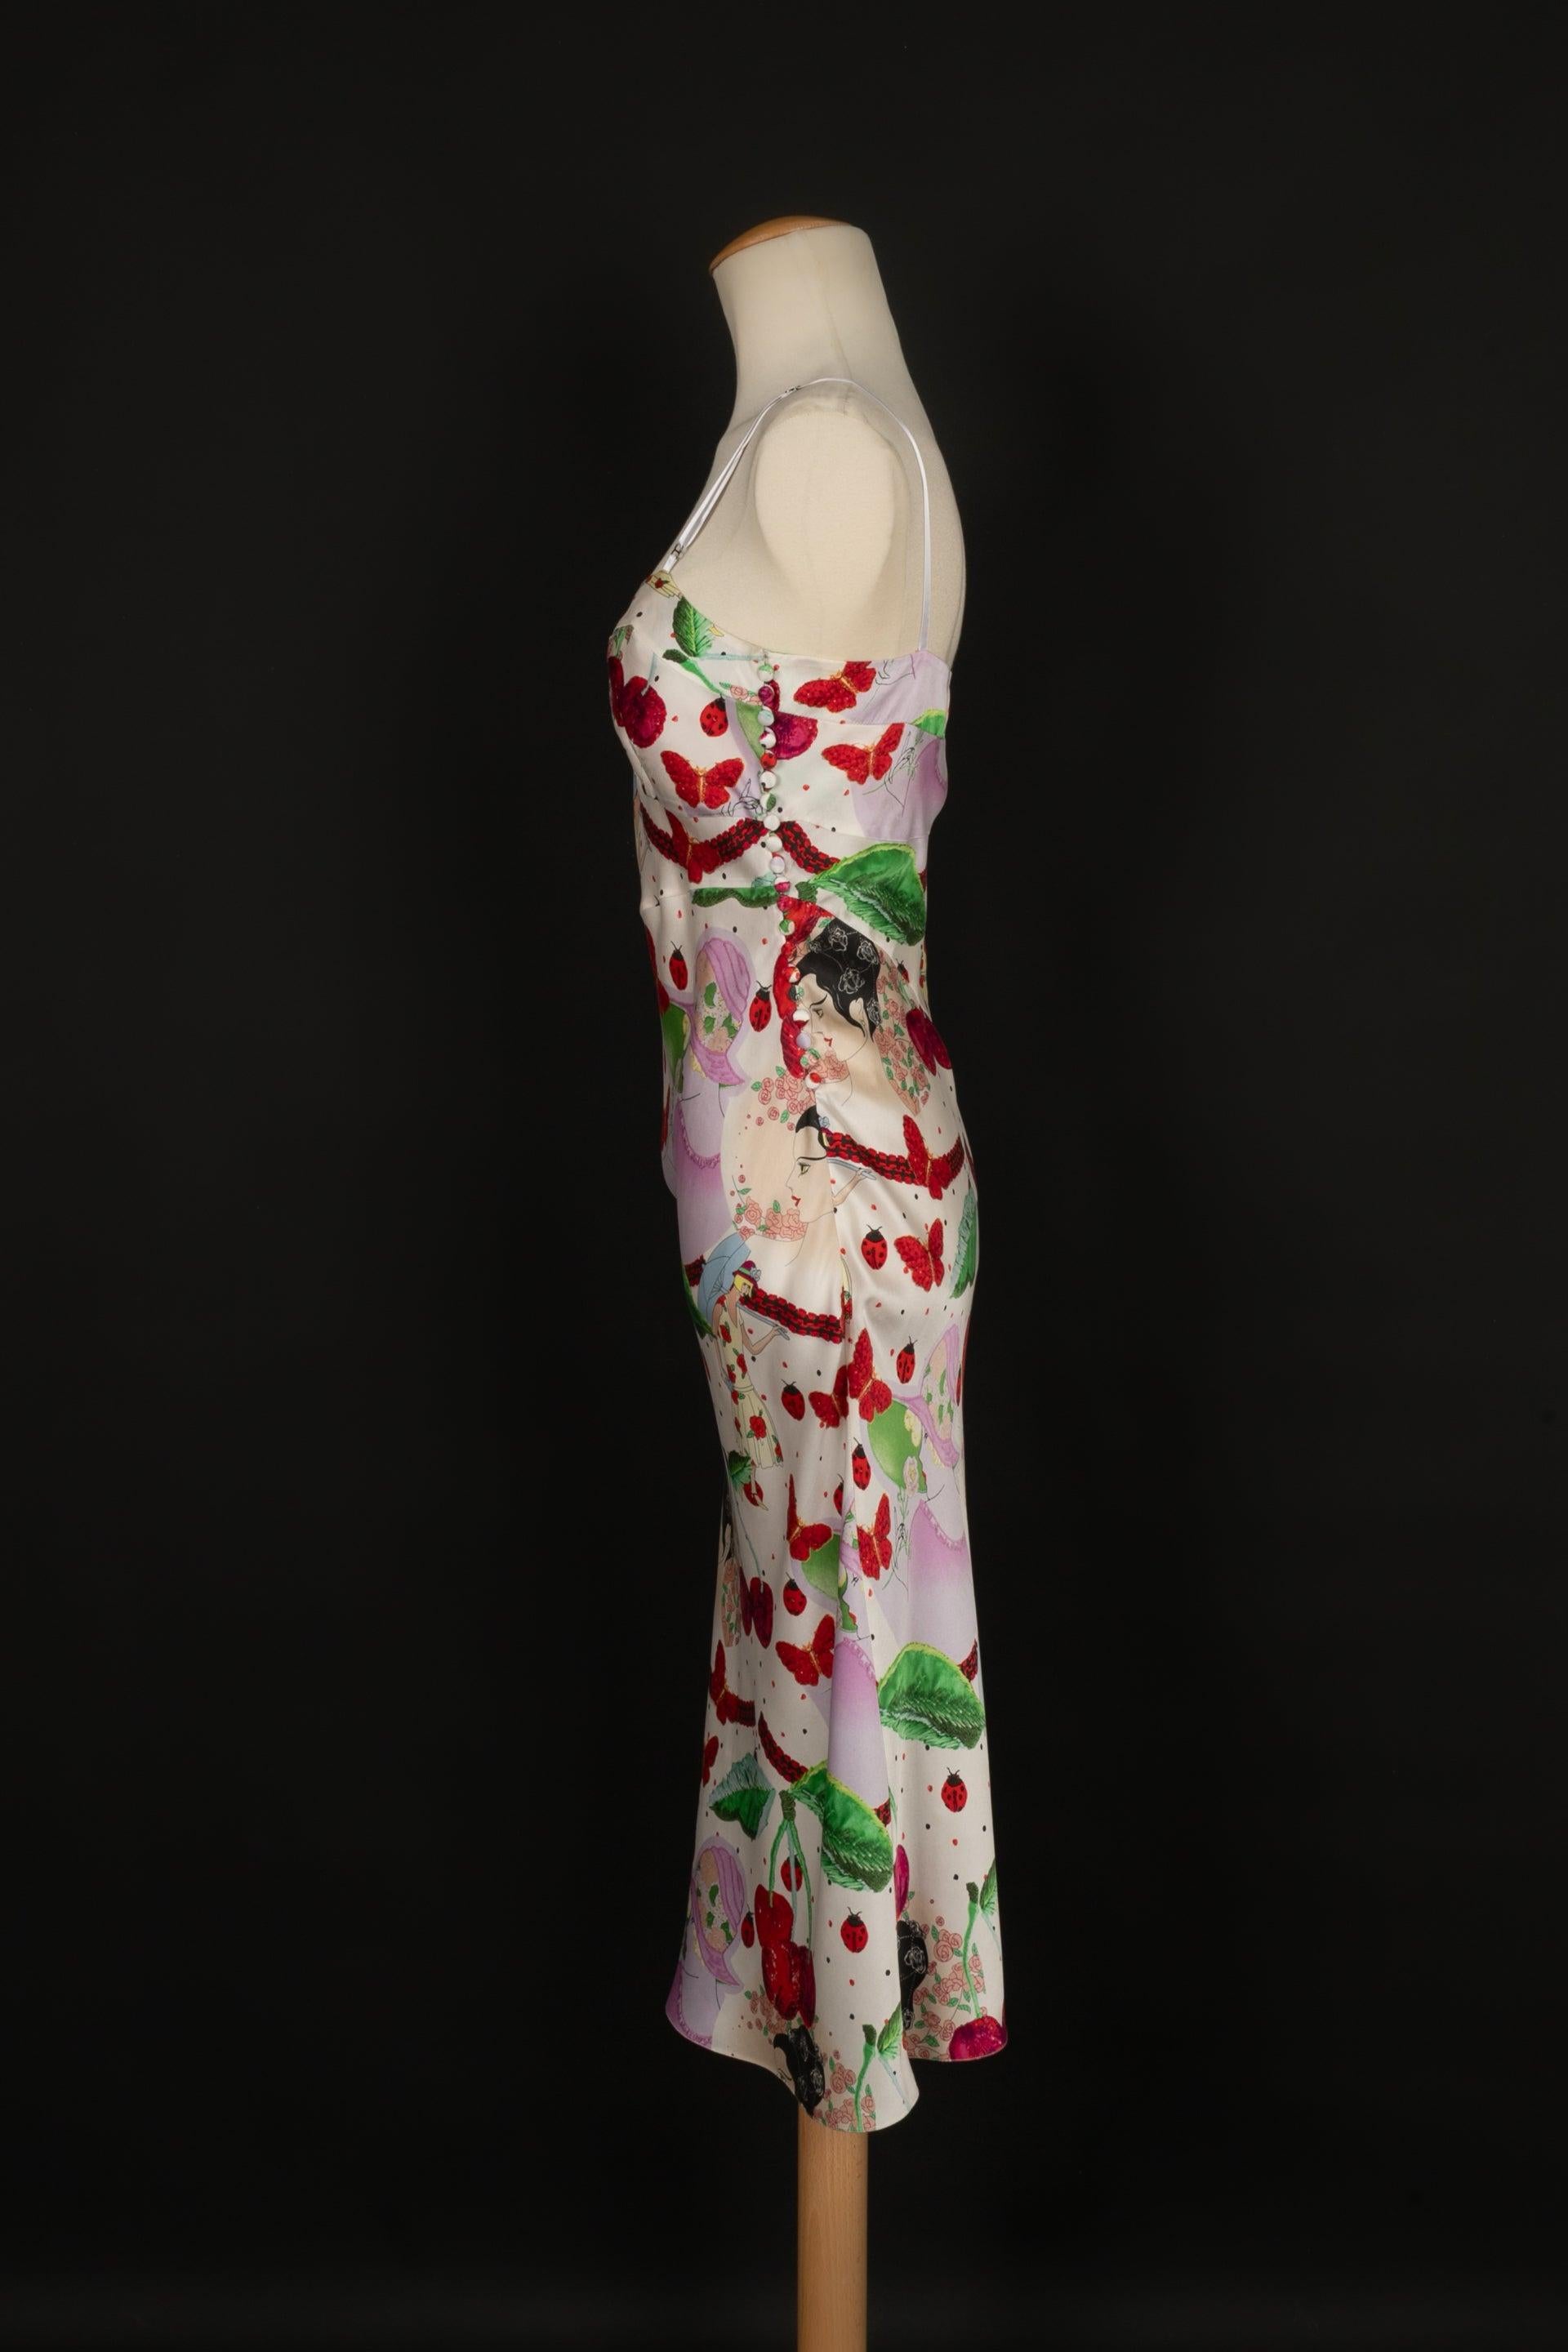 Galliano - Silk mid-length dress printed with patterns. No size indicated, it fits a 36FR.

Additional information:
Condition: Very good condition
Dimensions: Chest: 42 cm
Waist: 39 cm
Length: 100 cm

Seller reference: VR36